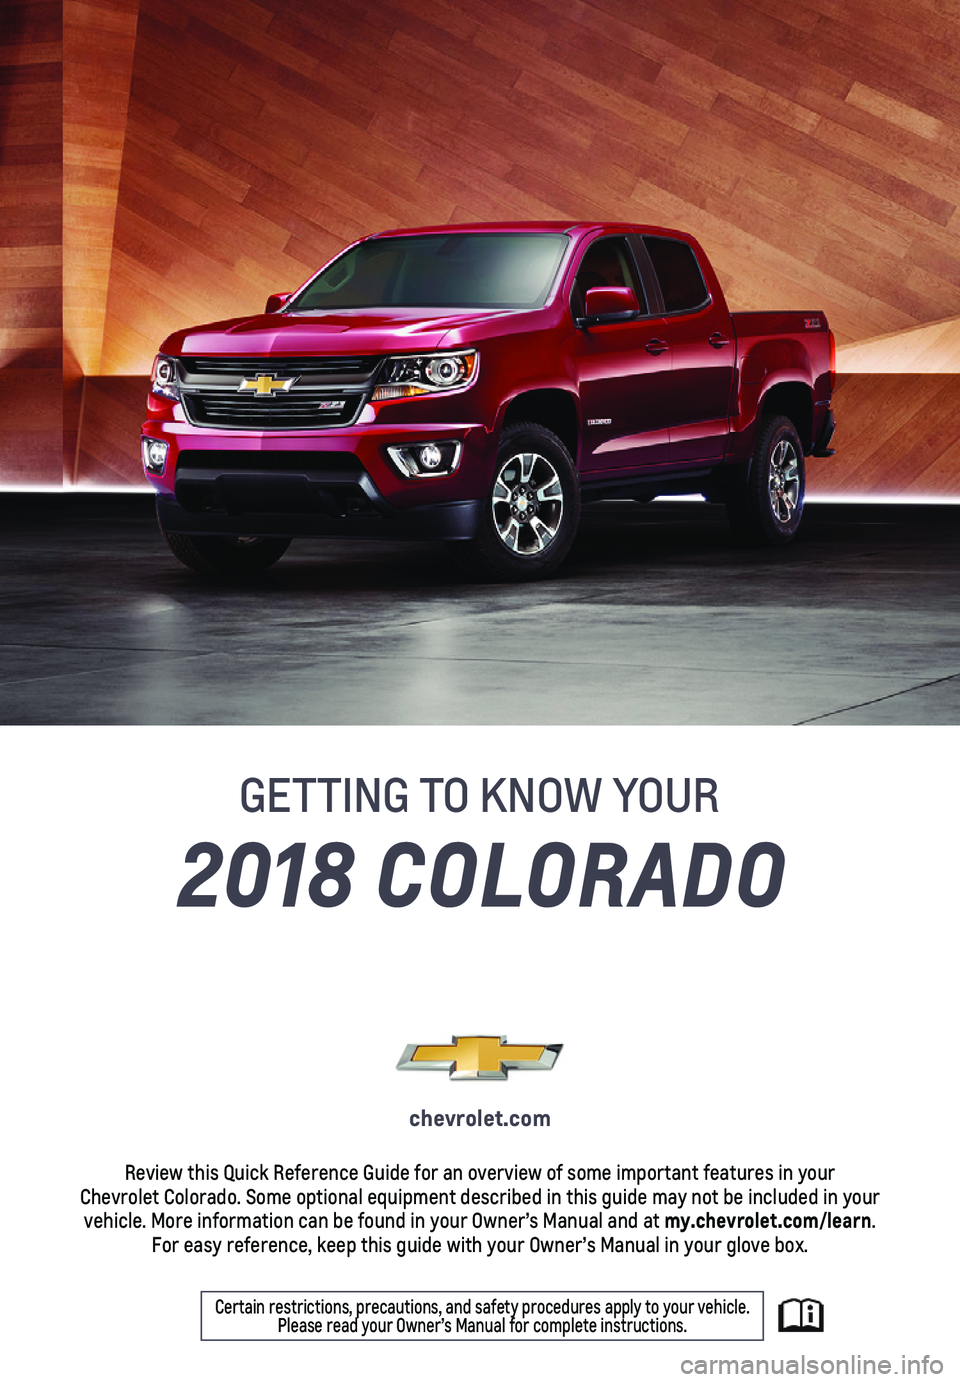 CHEVROLET COLORADO 2018  Get To Know Guide 1
2018 COLORADO
GETTING TO KNOW YOUR
chevrolet.com
Review this Quick Reference Guide for an overview of some important feat\
ures in your  Chevrolet Colorado. Some optional equipment described in this